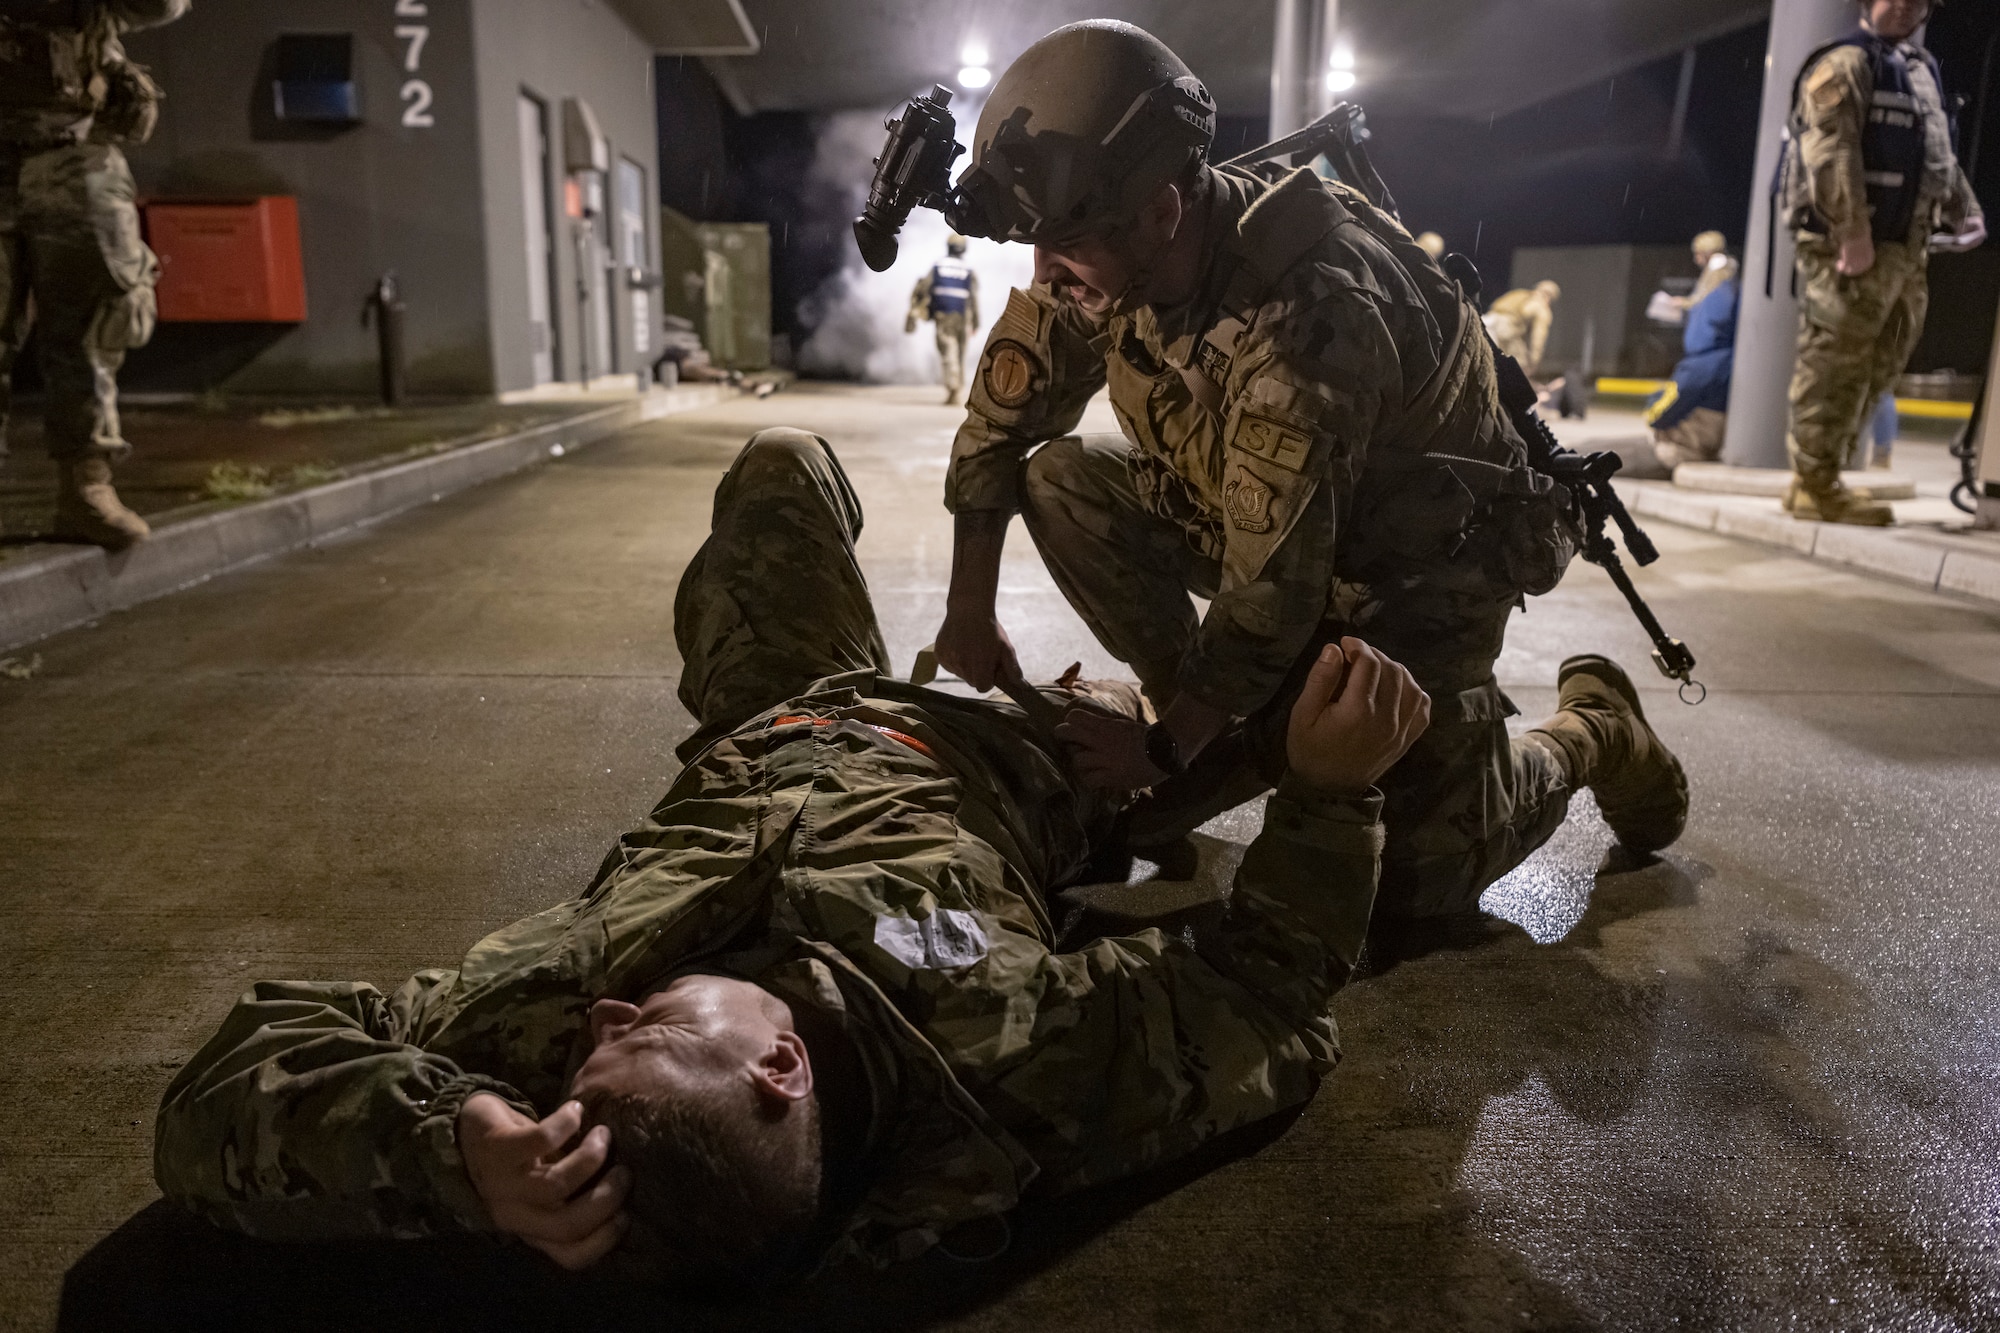 A U.S. Air Force member conducts medical care on a simulated victim.